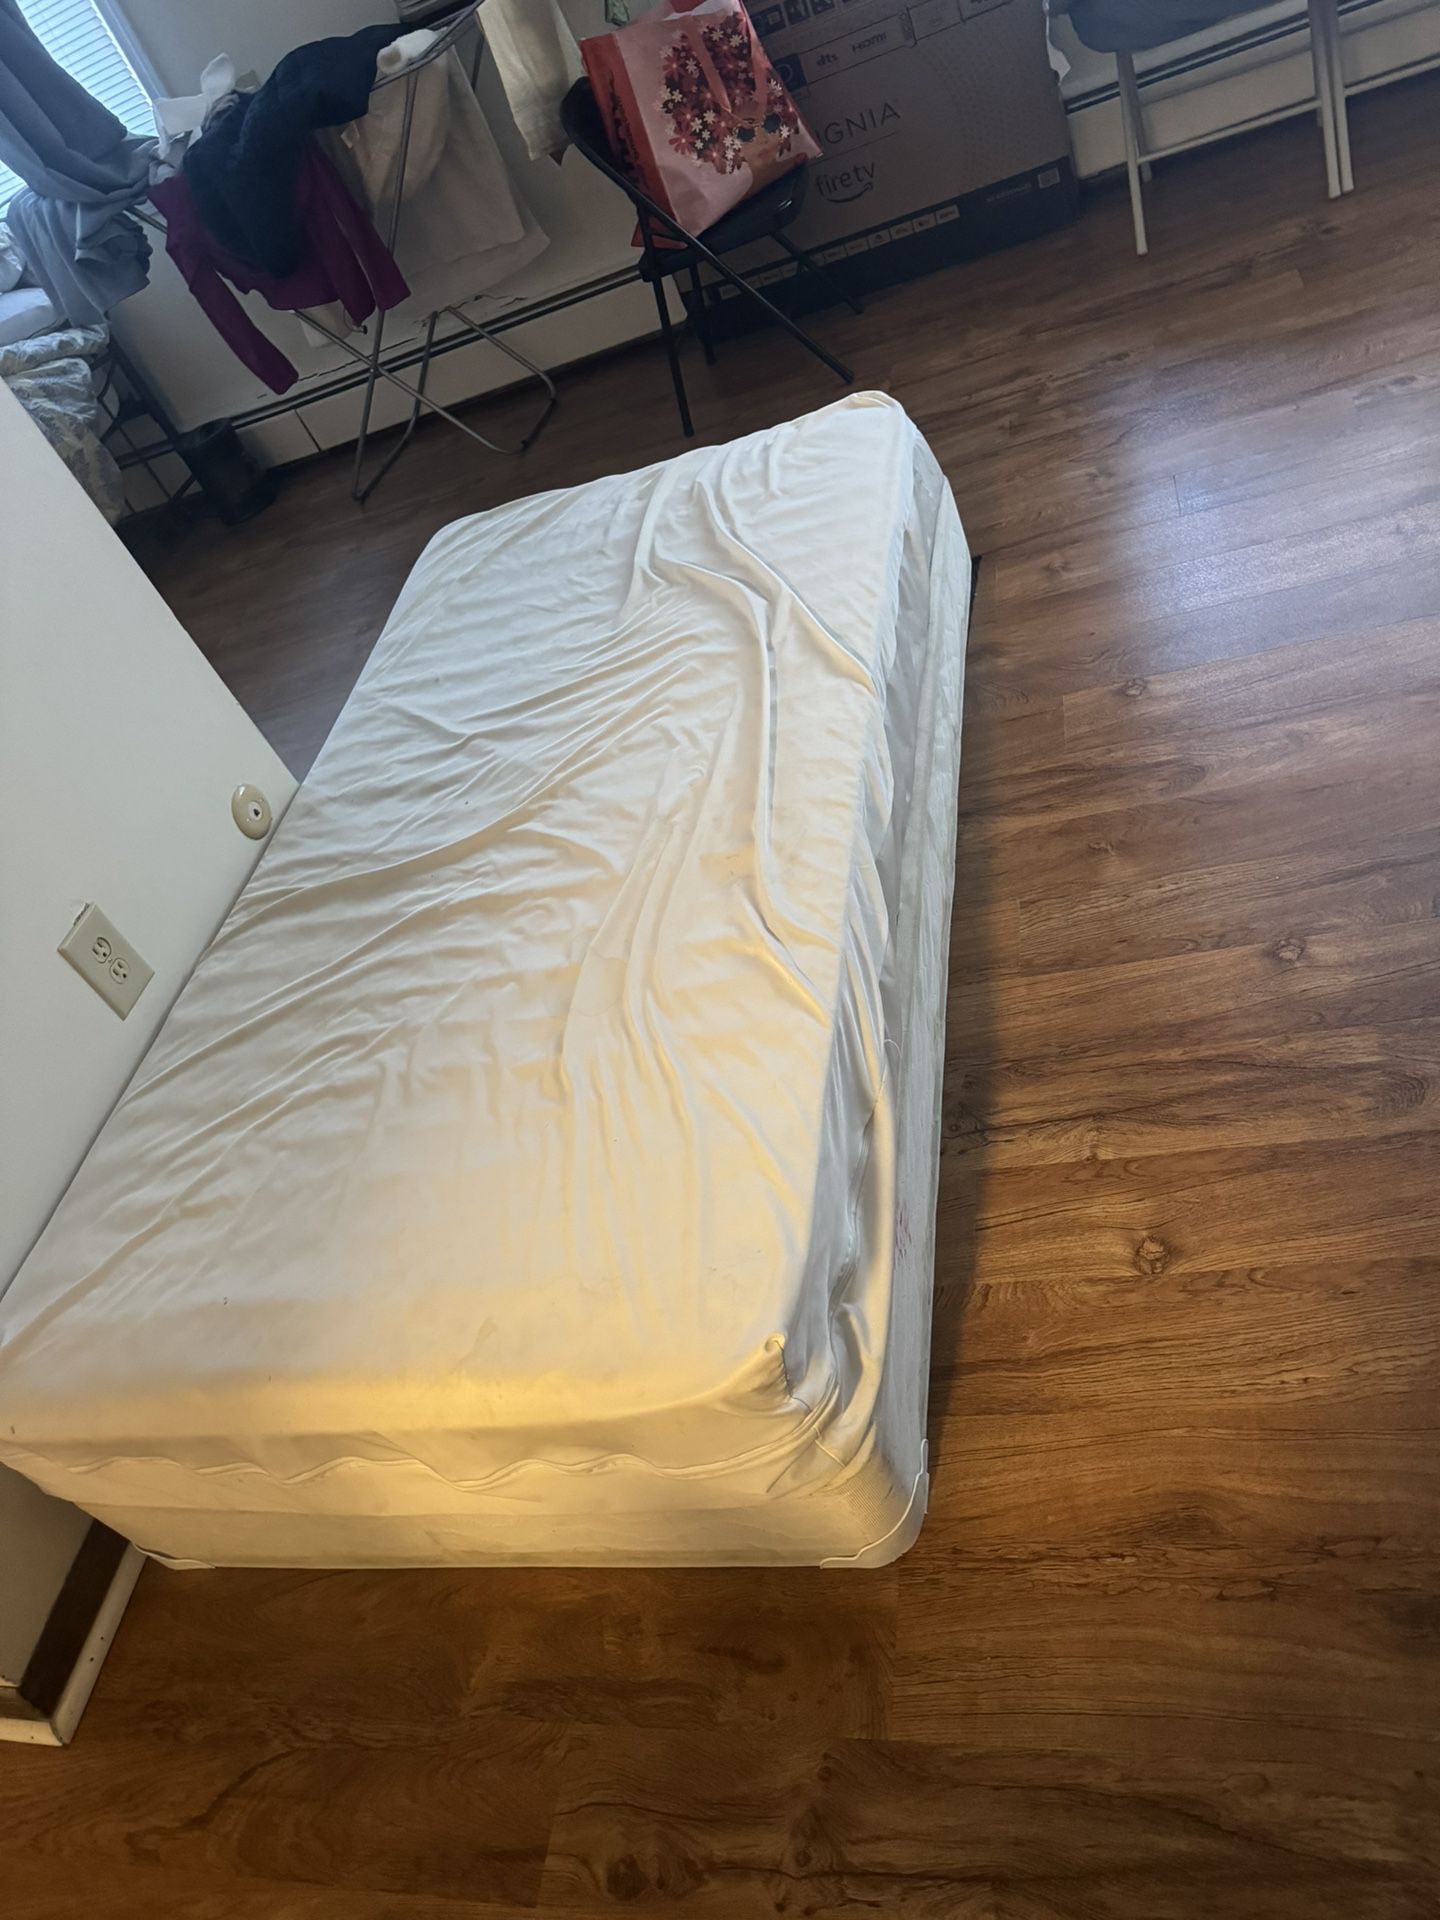 Spring Mattress With The Box